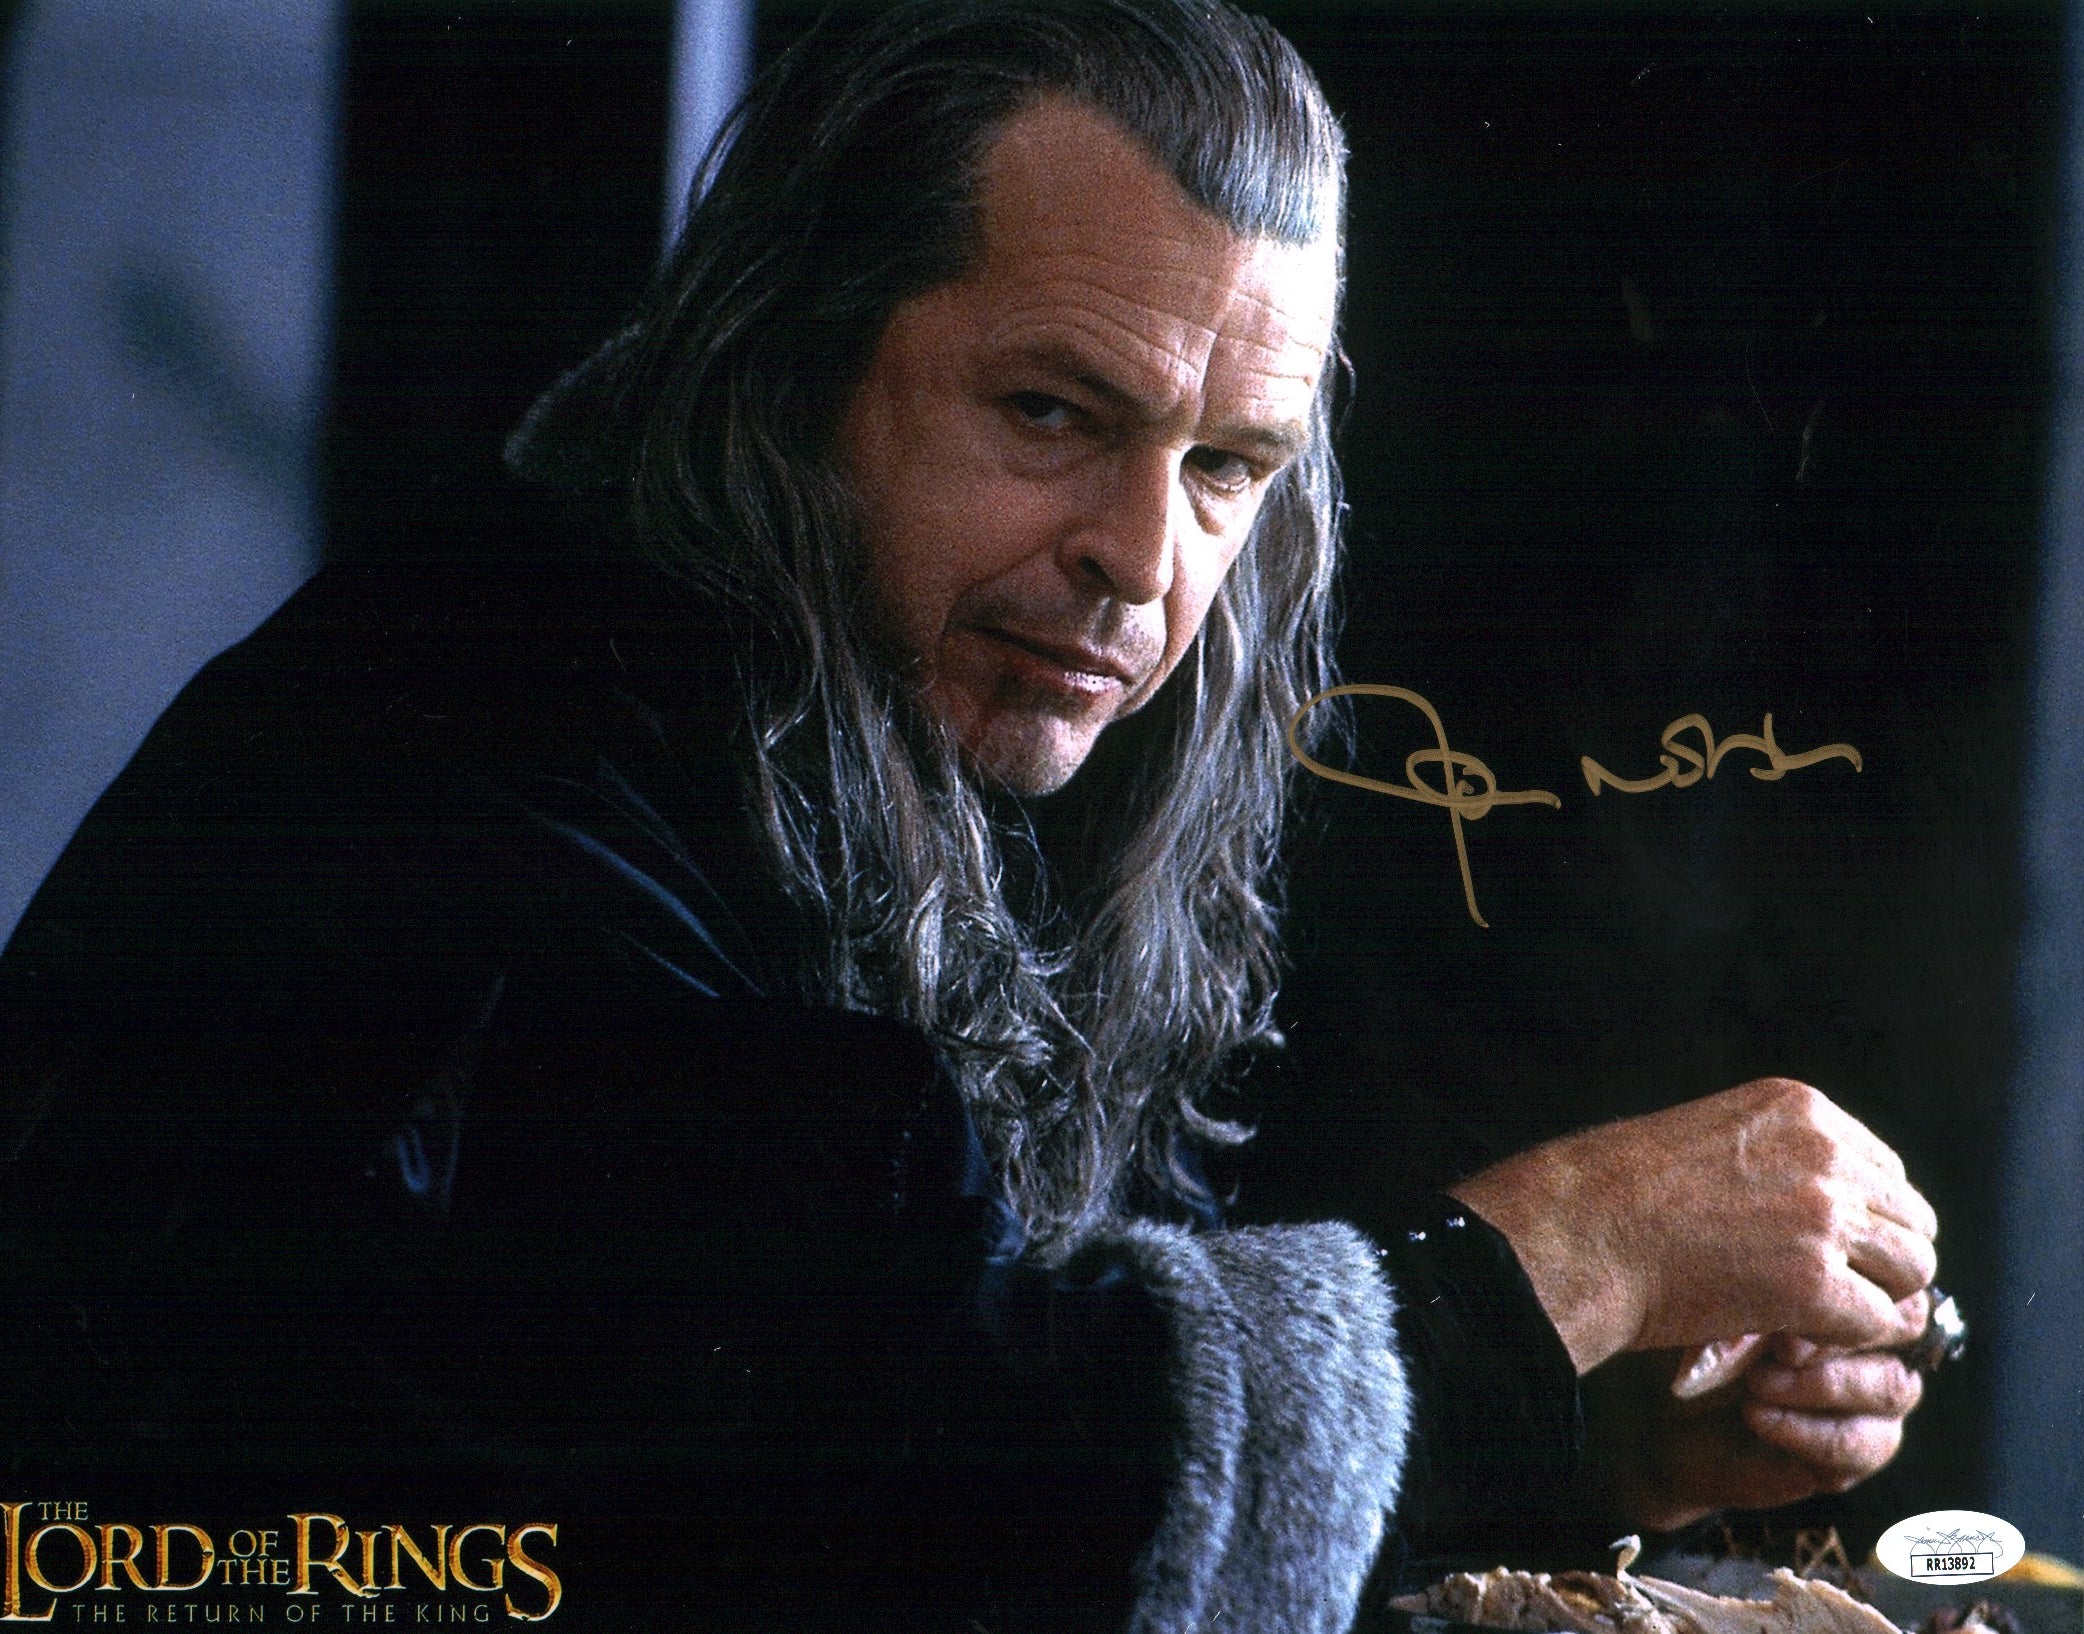 John Noble LOTR Lord of the Rings 11x14 Photo Poster Signed Autographed JSA COA Certified